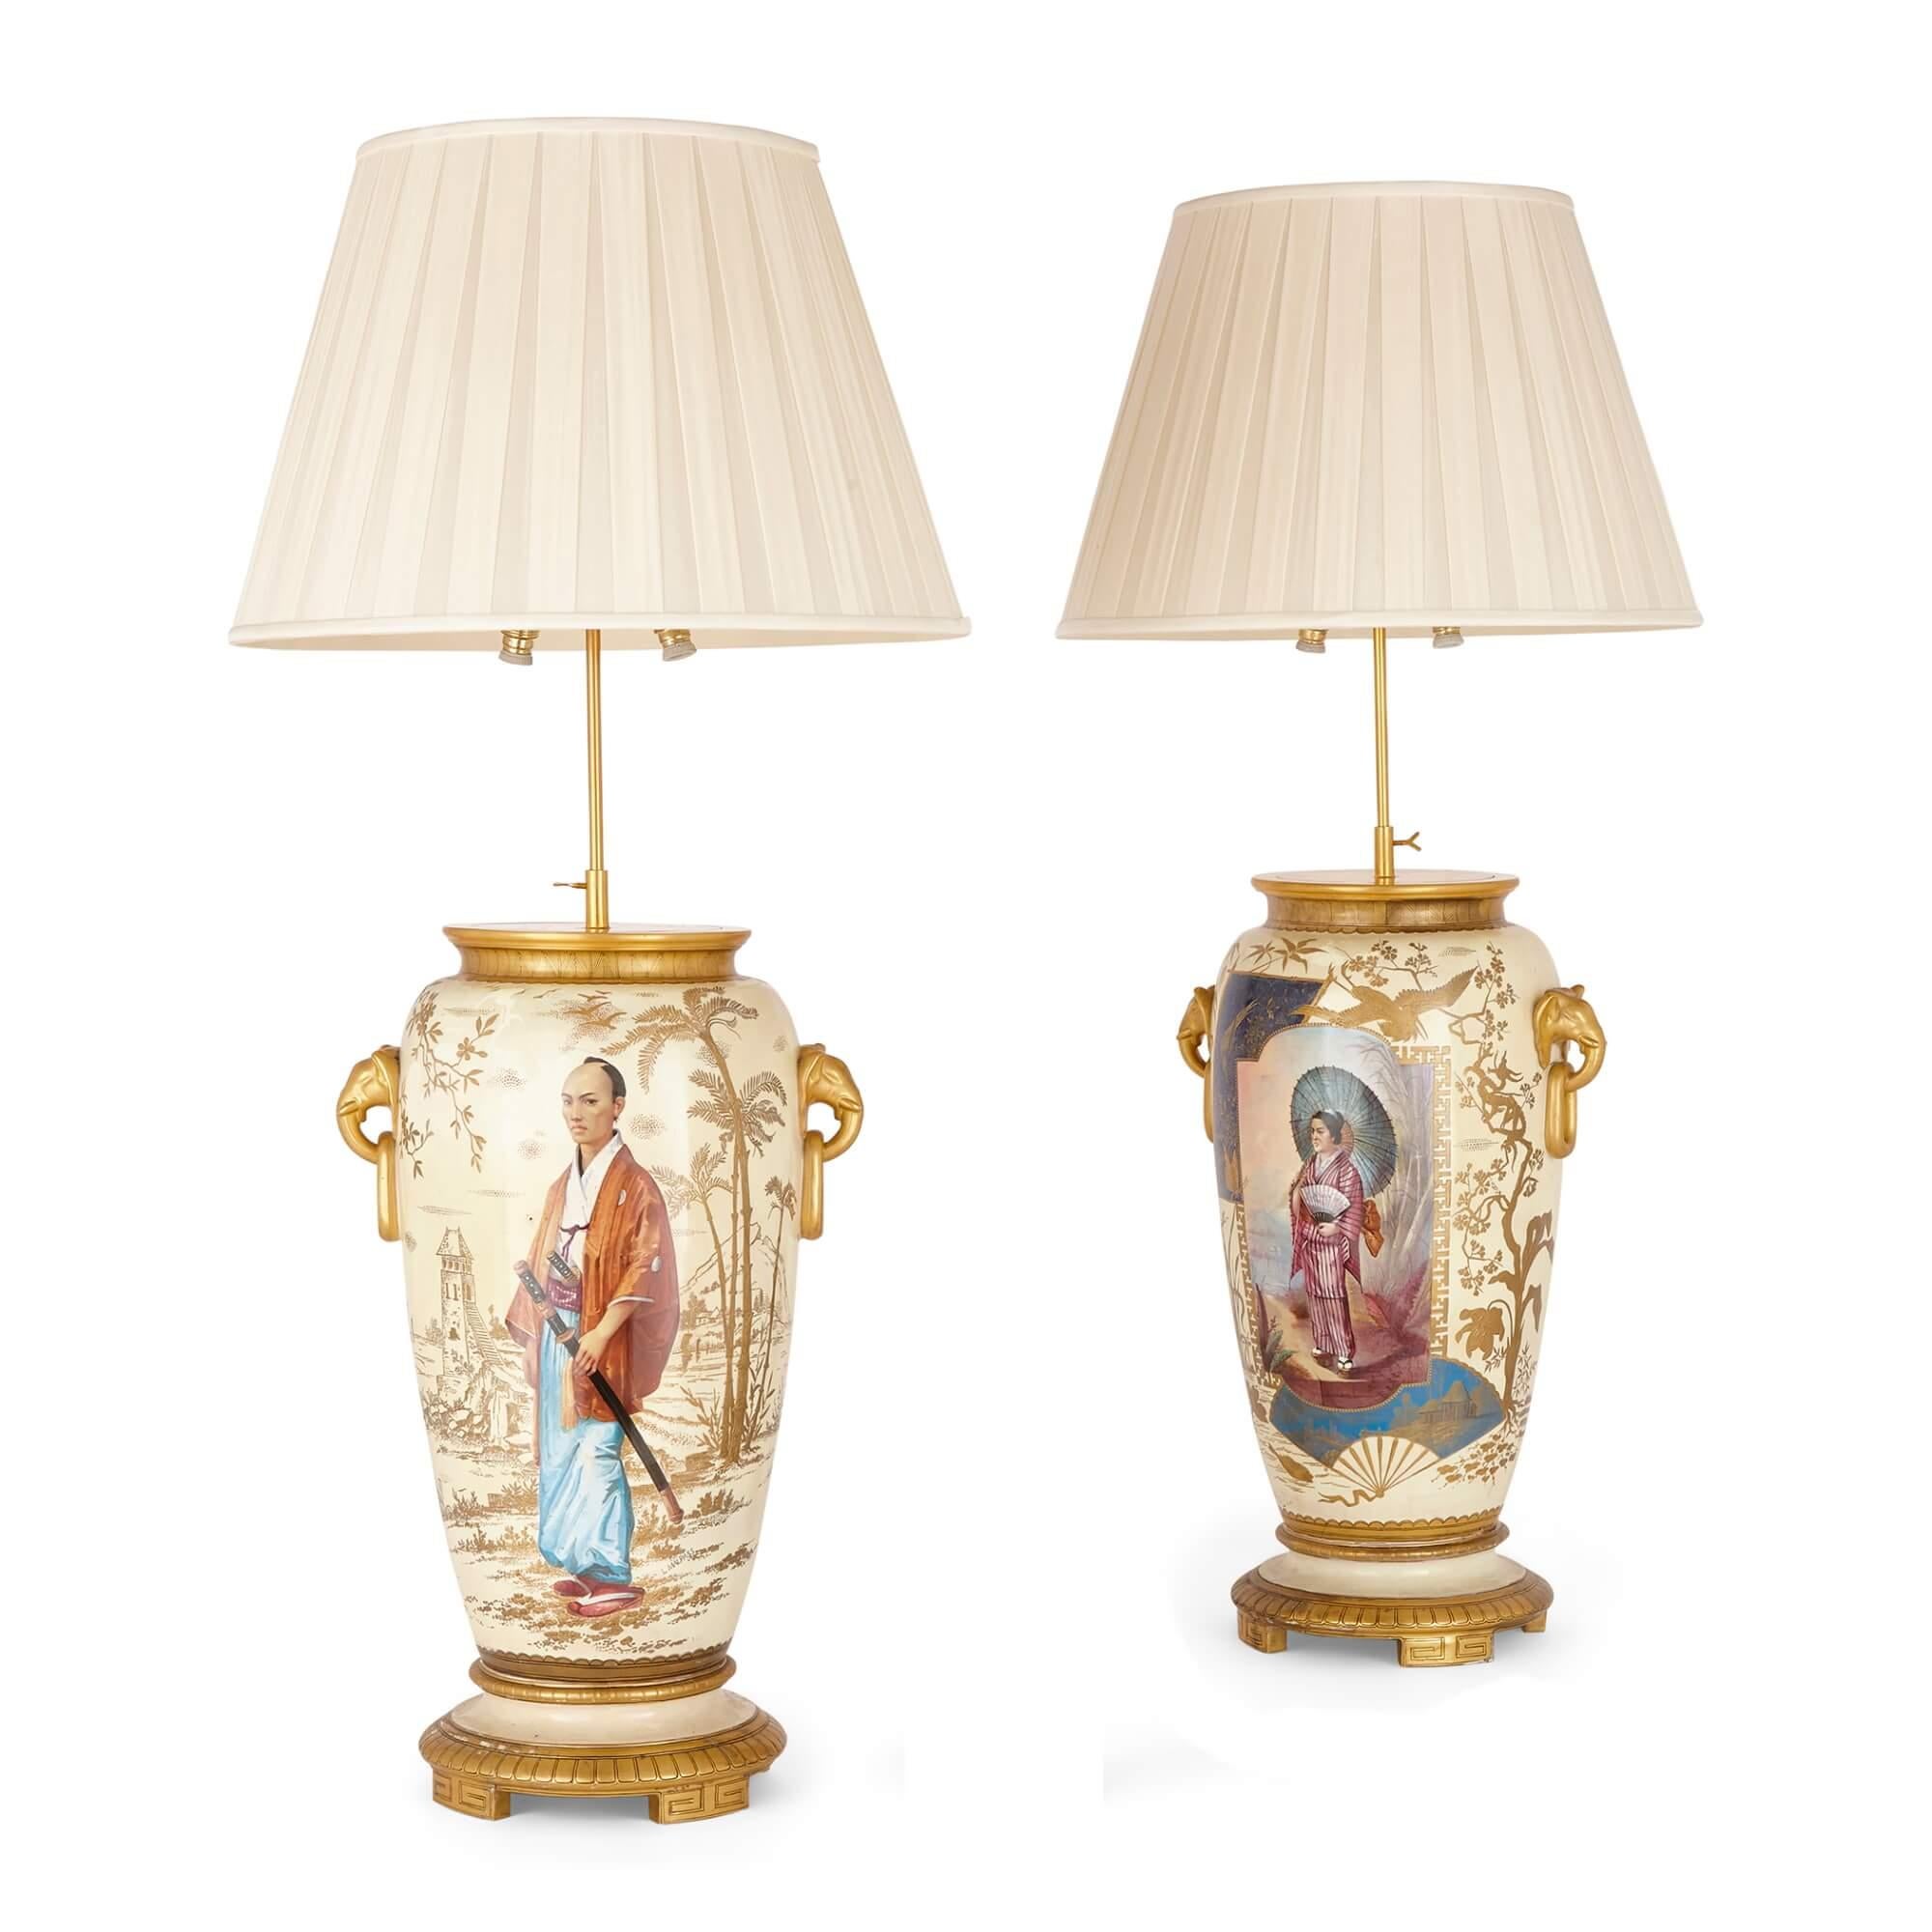 Pair of French antique Japonisme glazed ceramic and ormolu mounted lamps
French, Late 19th Century
Lamps: height 104cm, width 36cm, depth 26cm
Shades: height 33cm, diameter 50cm

In the Japonisme style, these superb, exceptionally large lamps